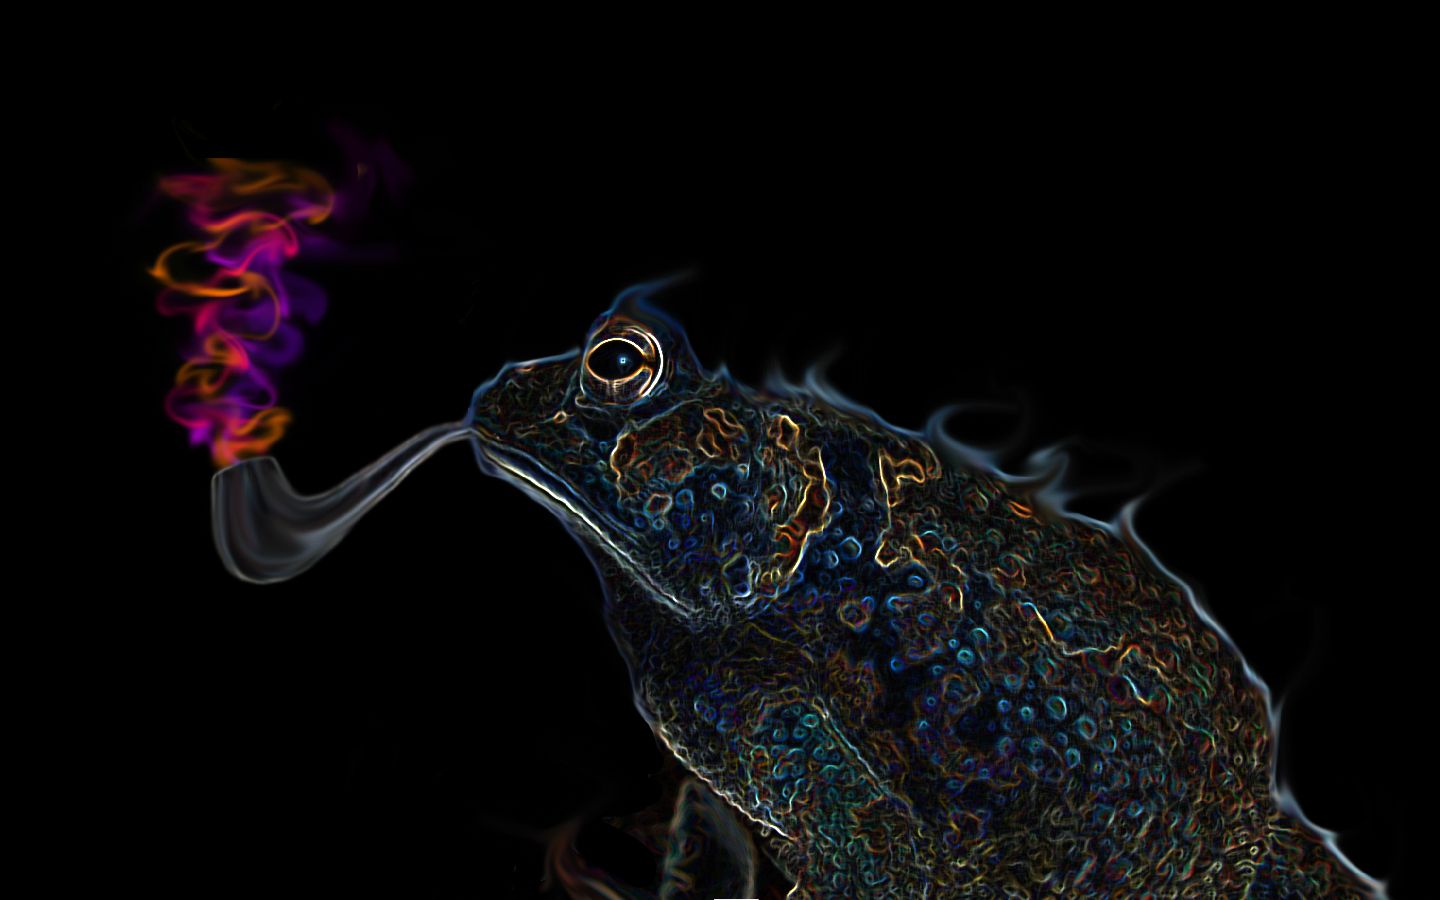 artistic, psychedelic, frog 1080p